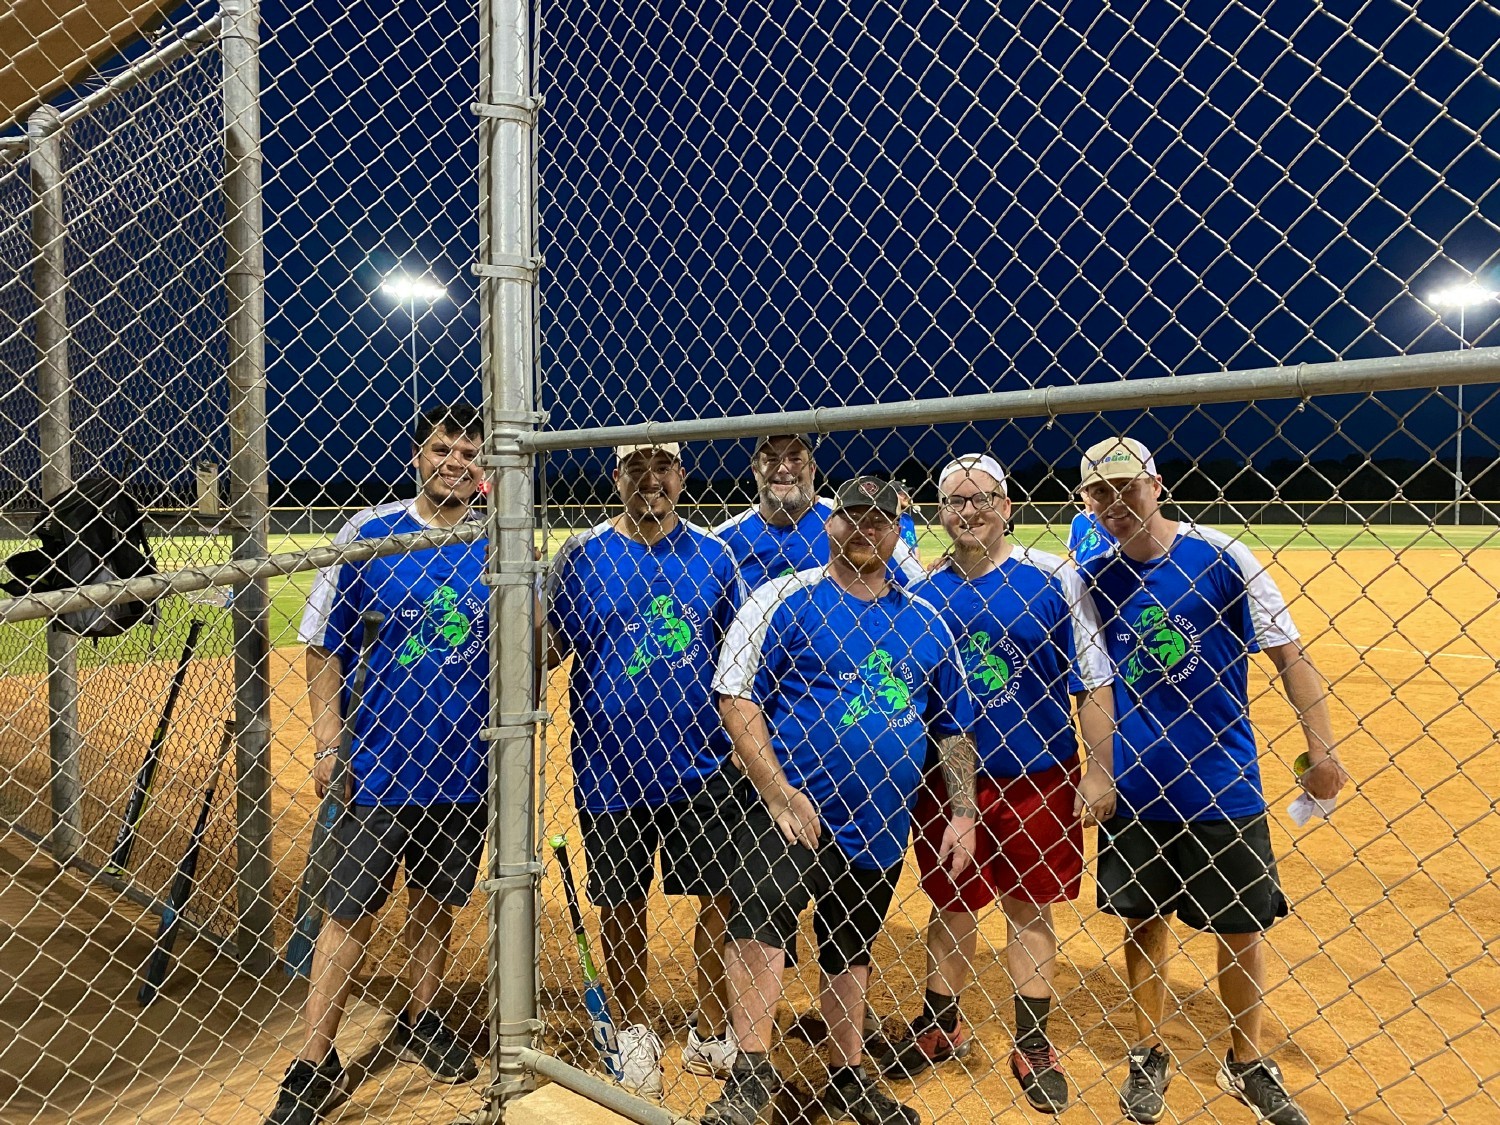 Some of our folks playing in a local baseball league.